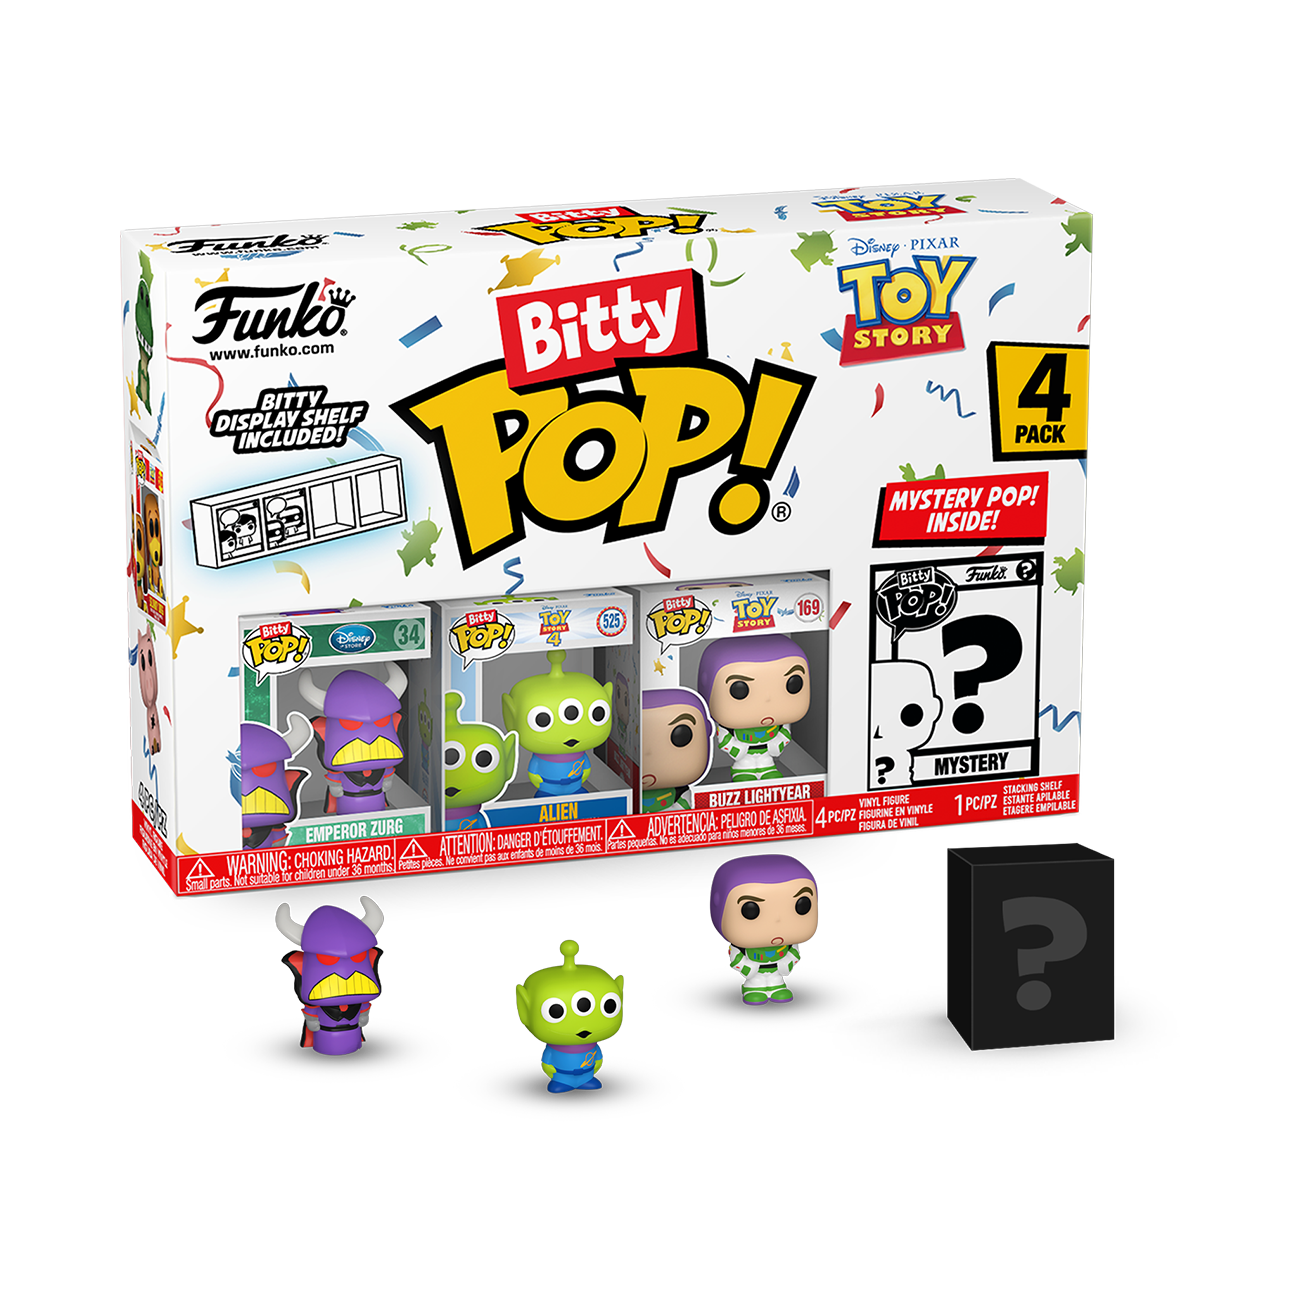 Funko BITTY POP! Toy Story 4-Pack Series 4